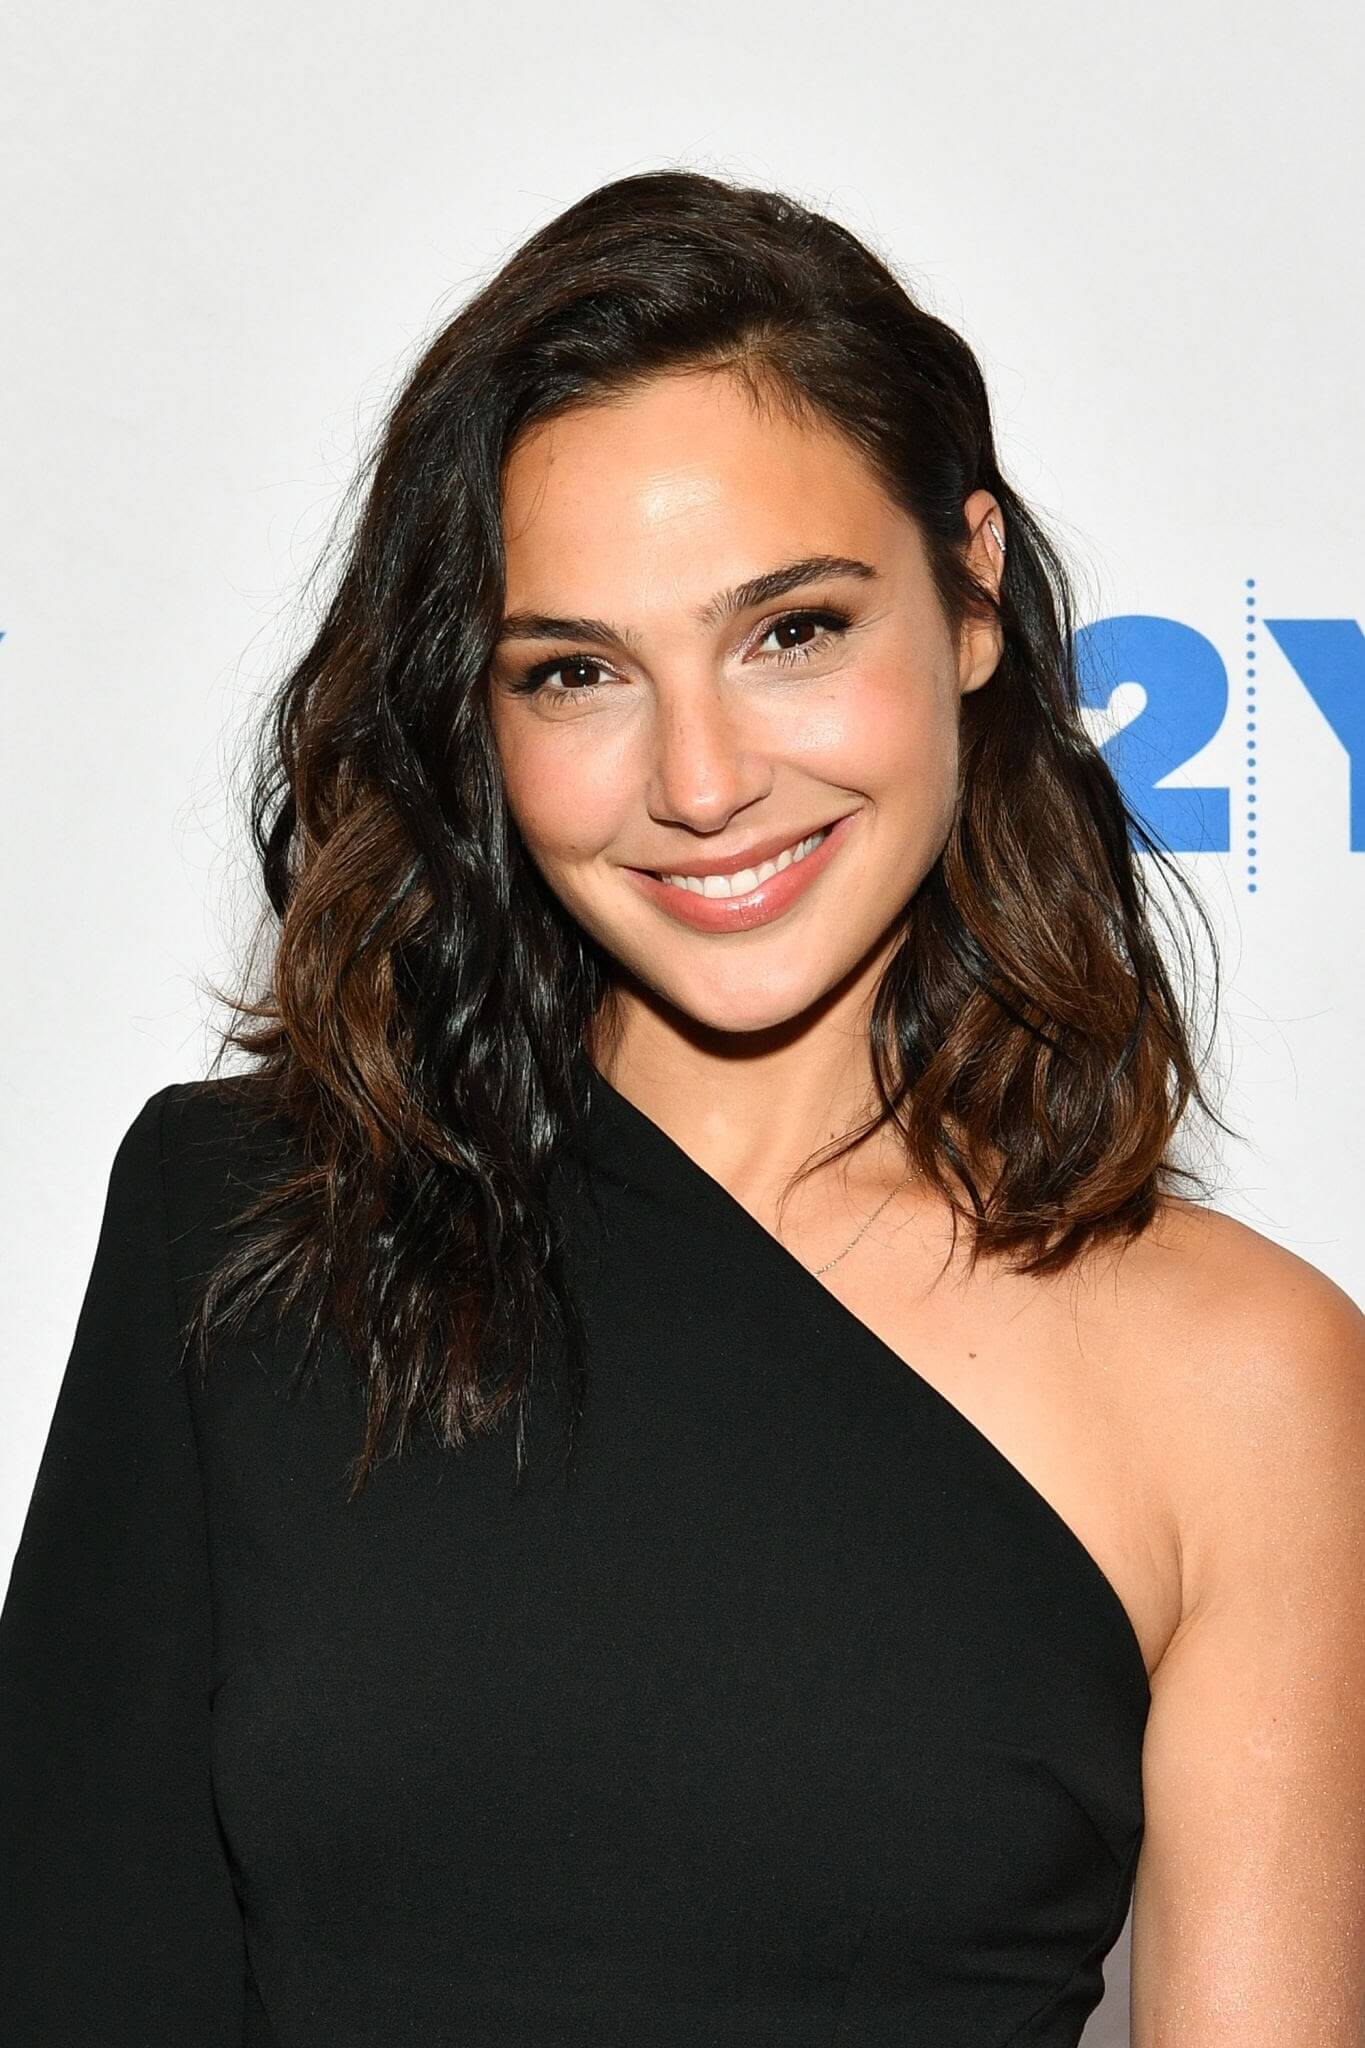 Actors Who Are Cozier, Gal Gadot